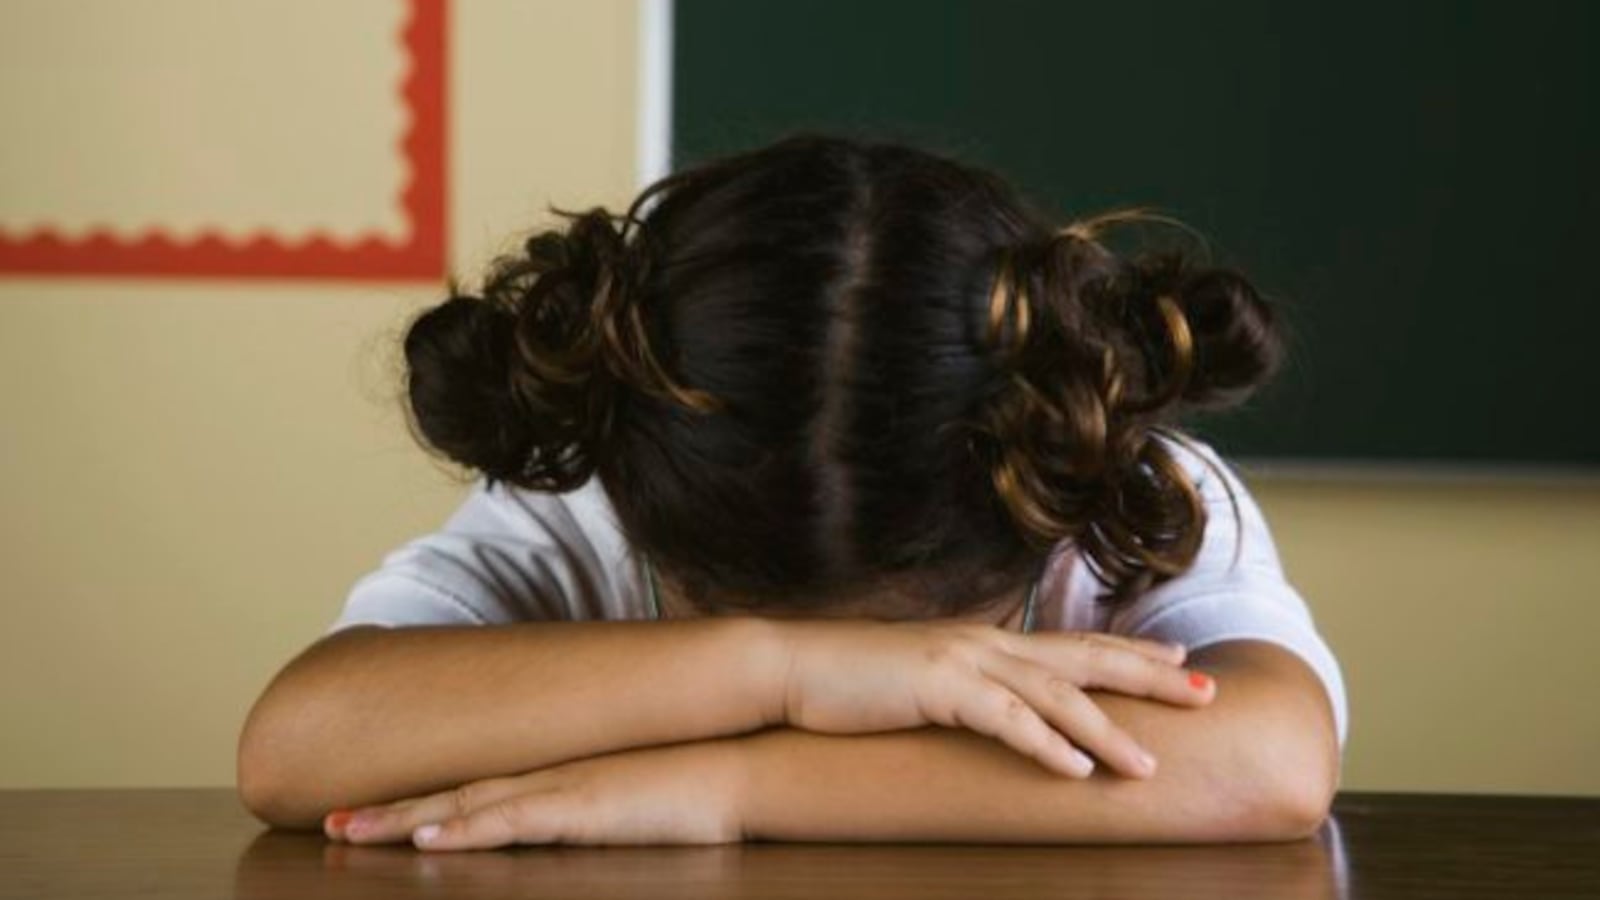 Childhood trauma can make it hard for students to focus or behave in classrooms.